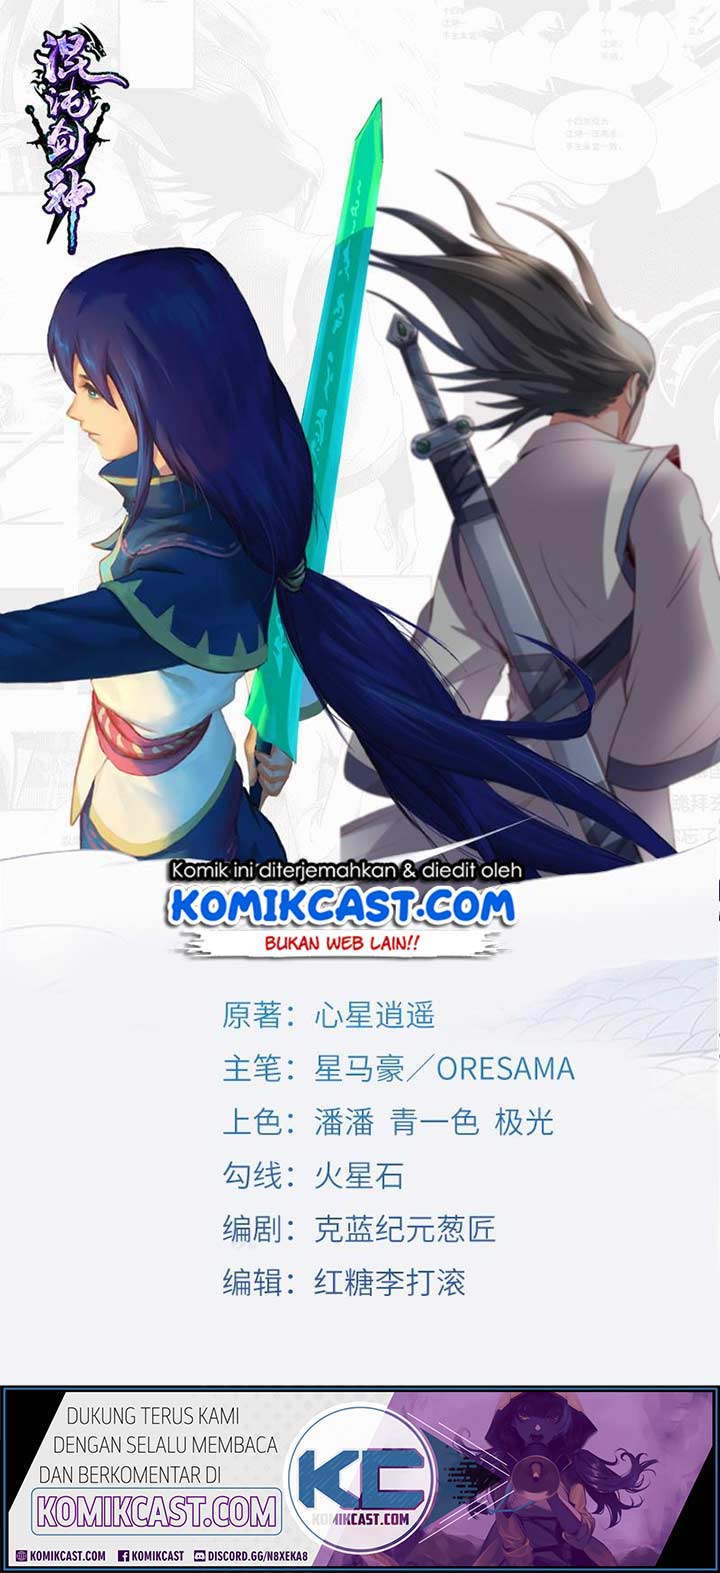 Chaotic Sword God Chapter 185